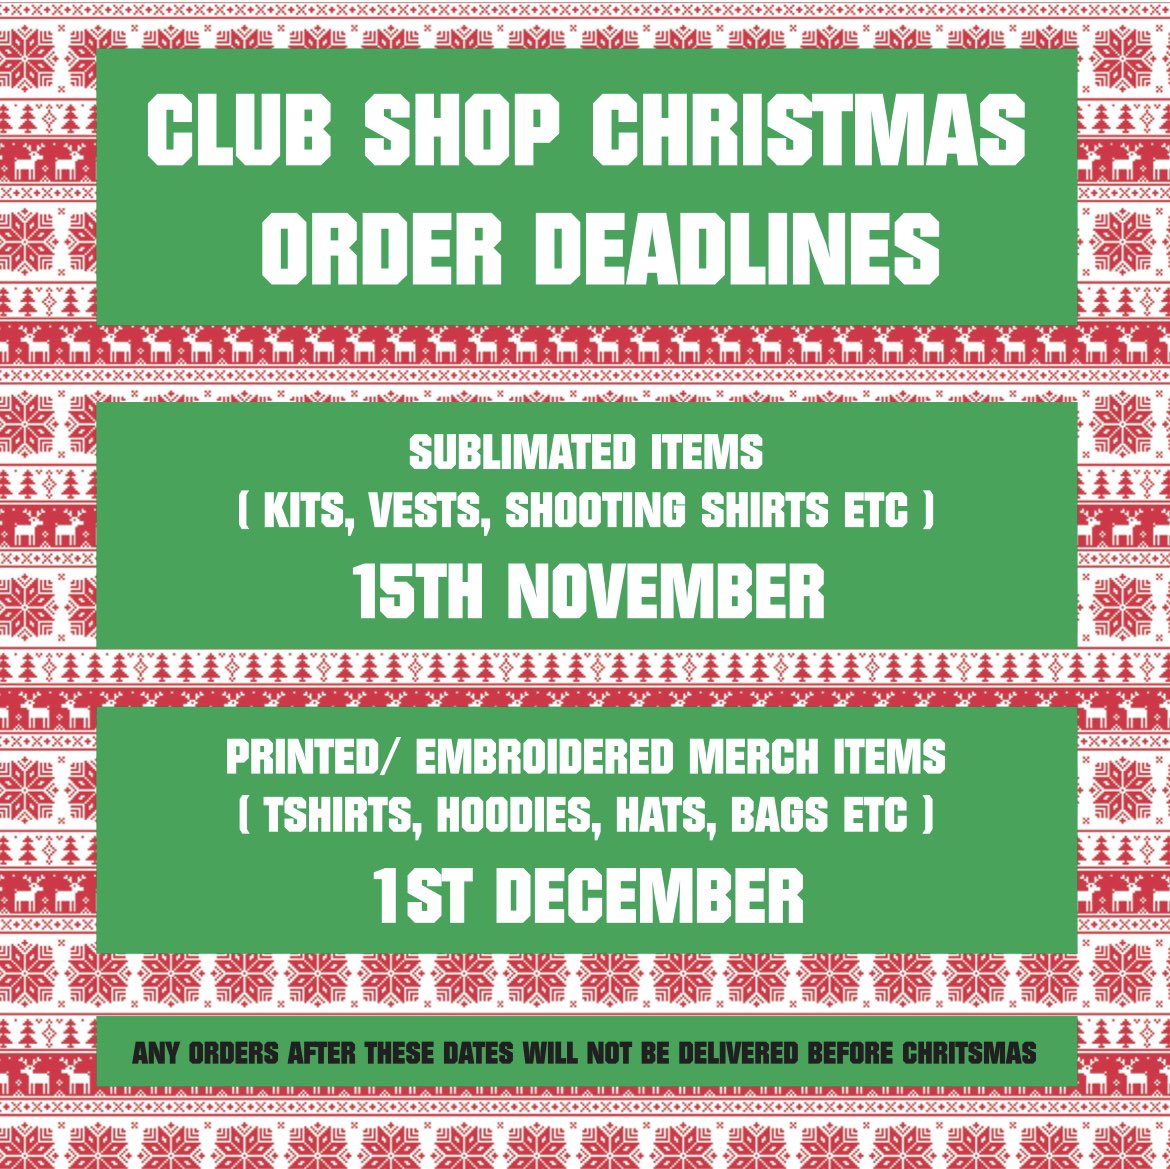 Xmas club shop order deadlines. Just incase you’ve not seen the emails we have sent out to all contacts.